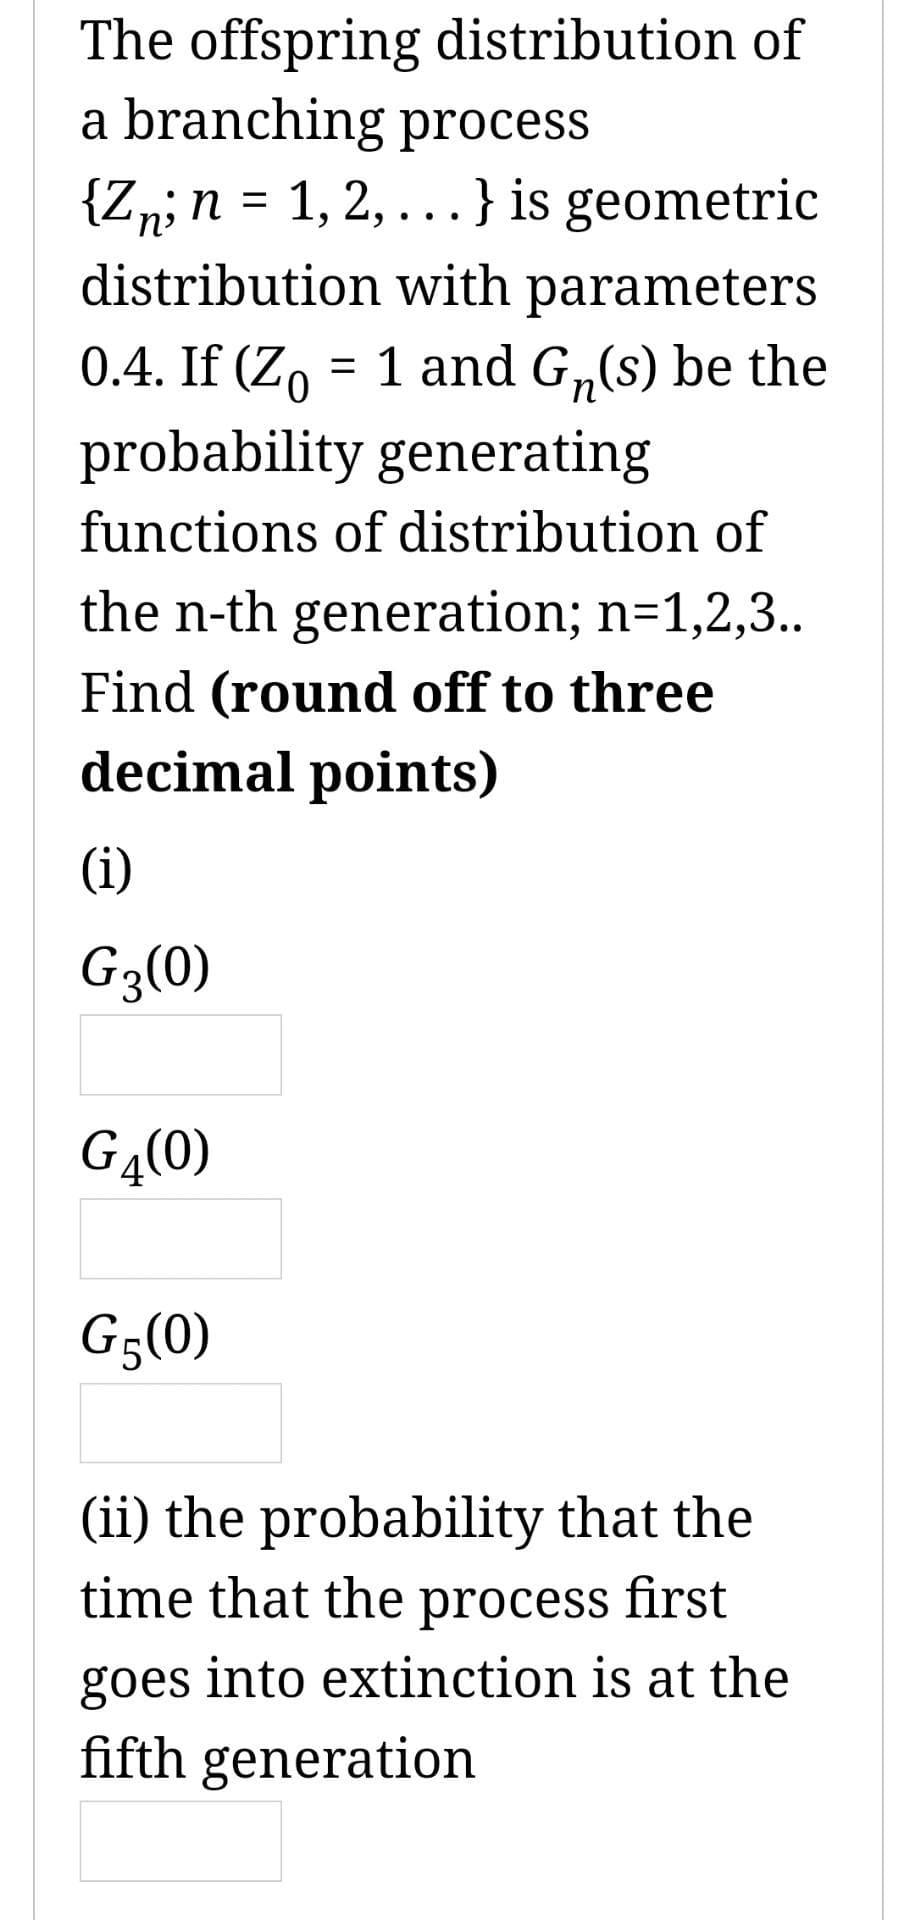 The offspring distribution of
a branching process
{Zn; n = 1, 2,...} is geometric
distribution with parameters
0.4. If (Z = 1 and G₁(s) be the
probability generating
functions of distribution of
the n-th generation; n=1,2,3..
Find (round off to three
decimal points)
(i)
G3(0)
G4(0)
G5(0)
(ii) the probability that the
time that the process first
goes into extinction is at the
fifth generation